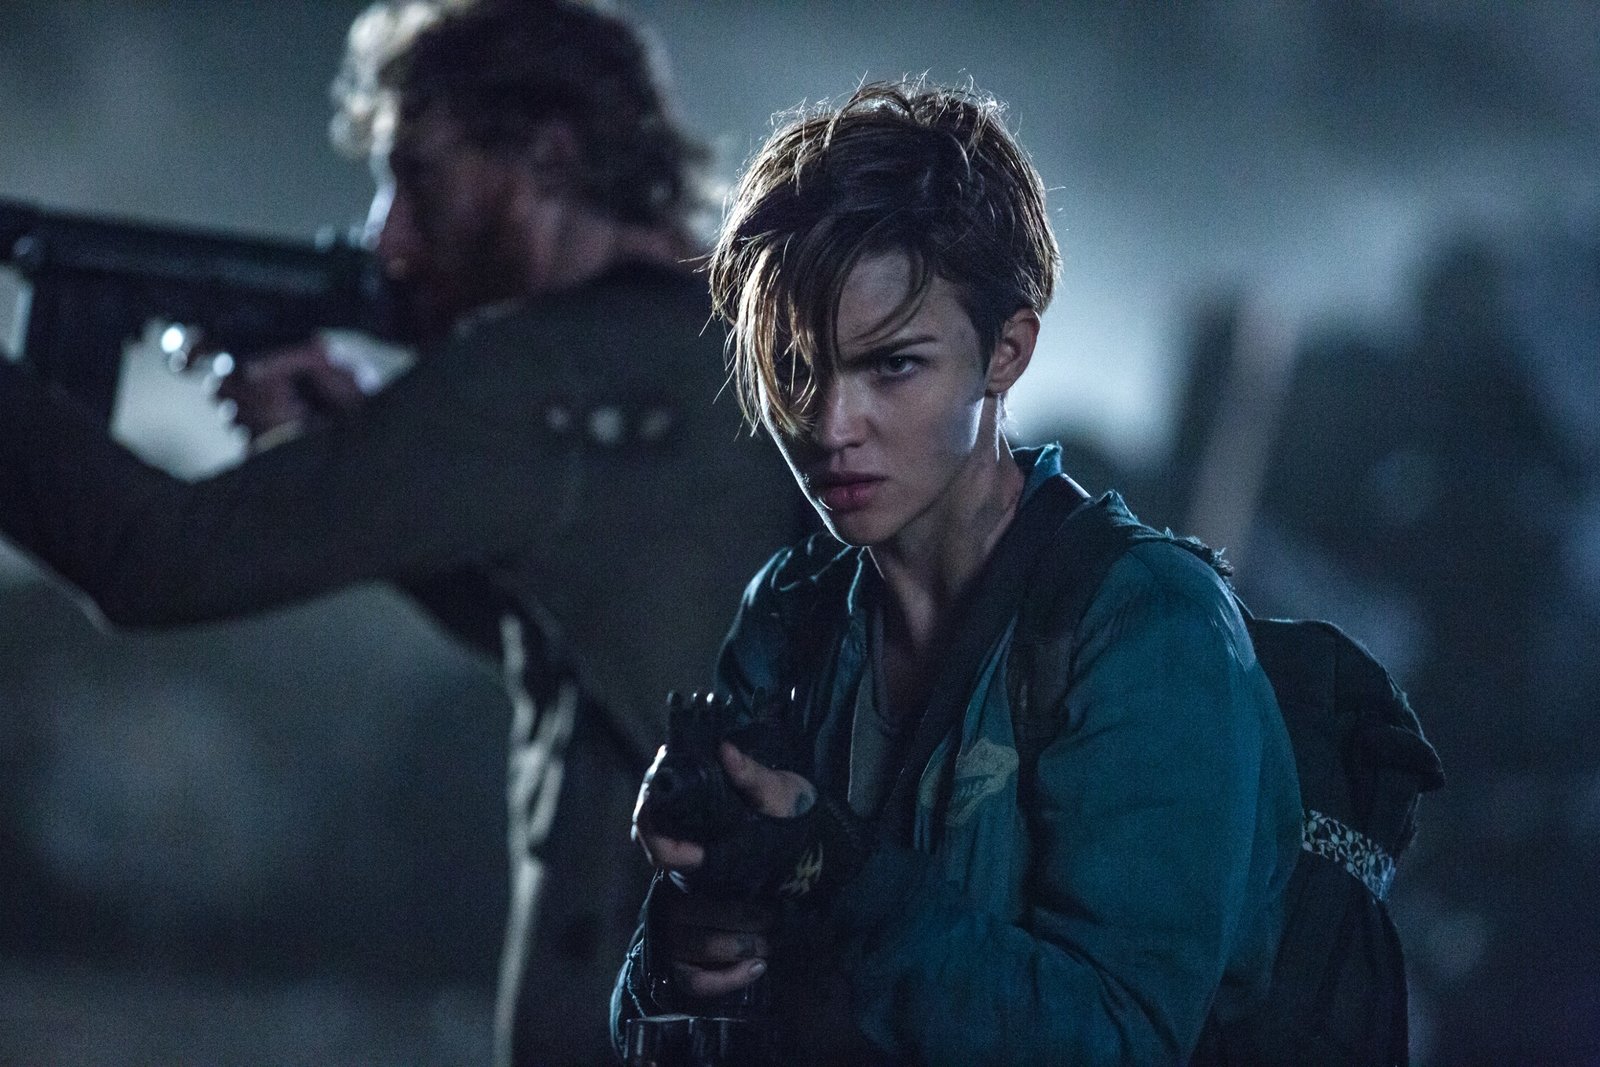 Resident Evil: The Final Chapter 3D (3D blu-ray)